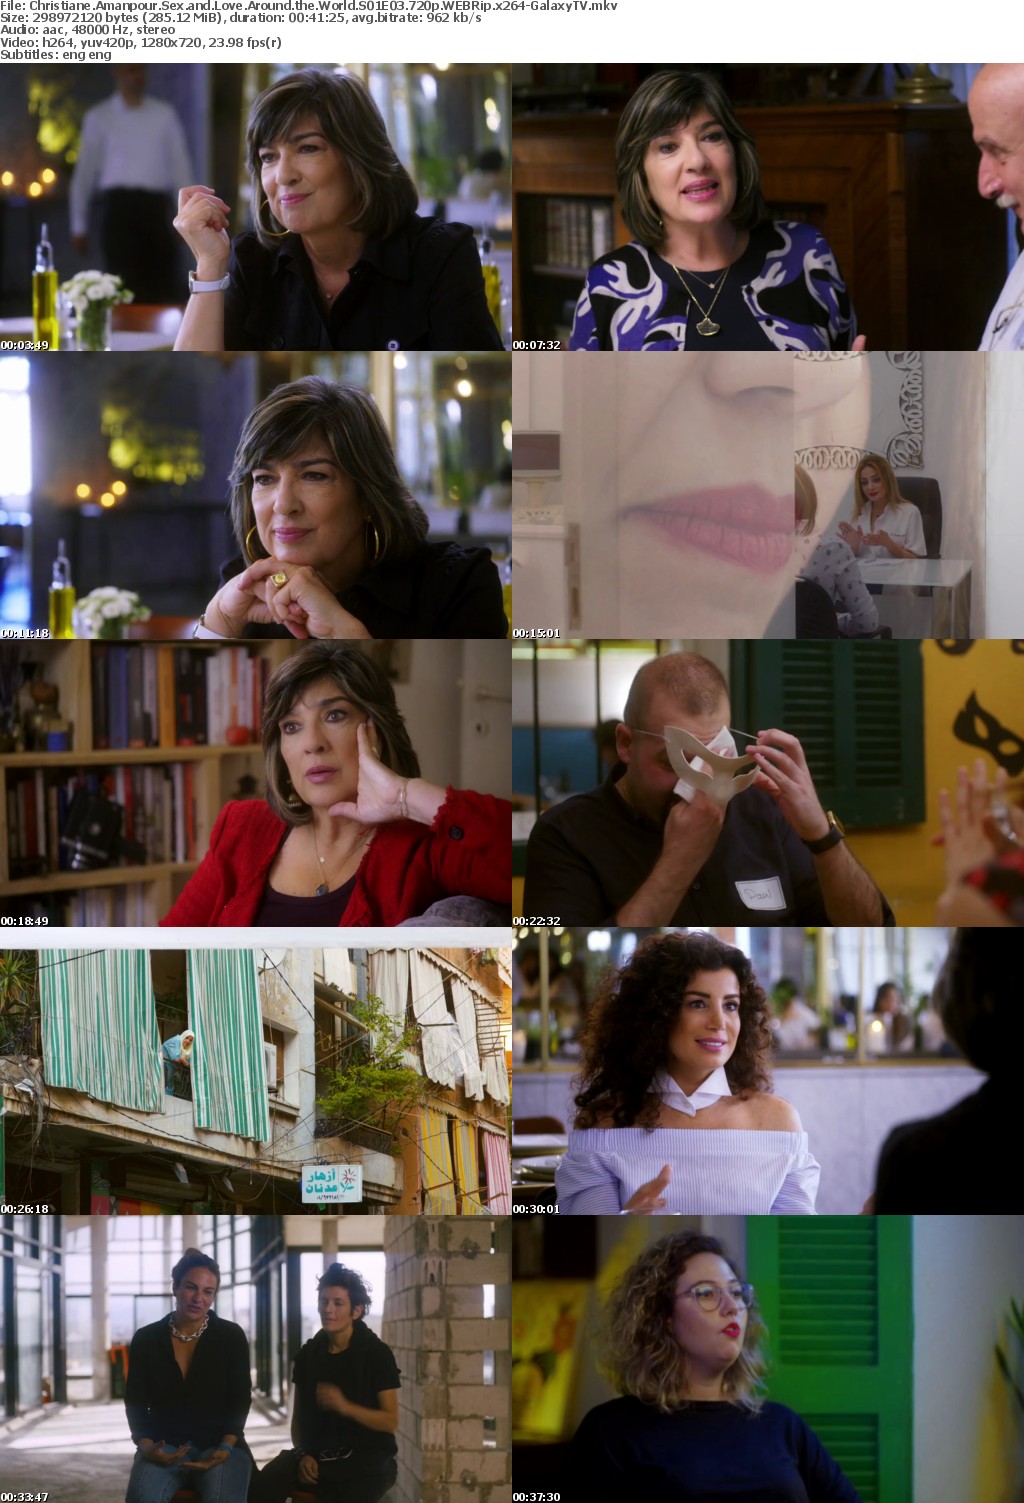 Christiane Amanpour Sex and Love Around the World S01 COMPLETE 720p WEBRip x264-GalaxyTV